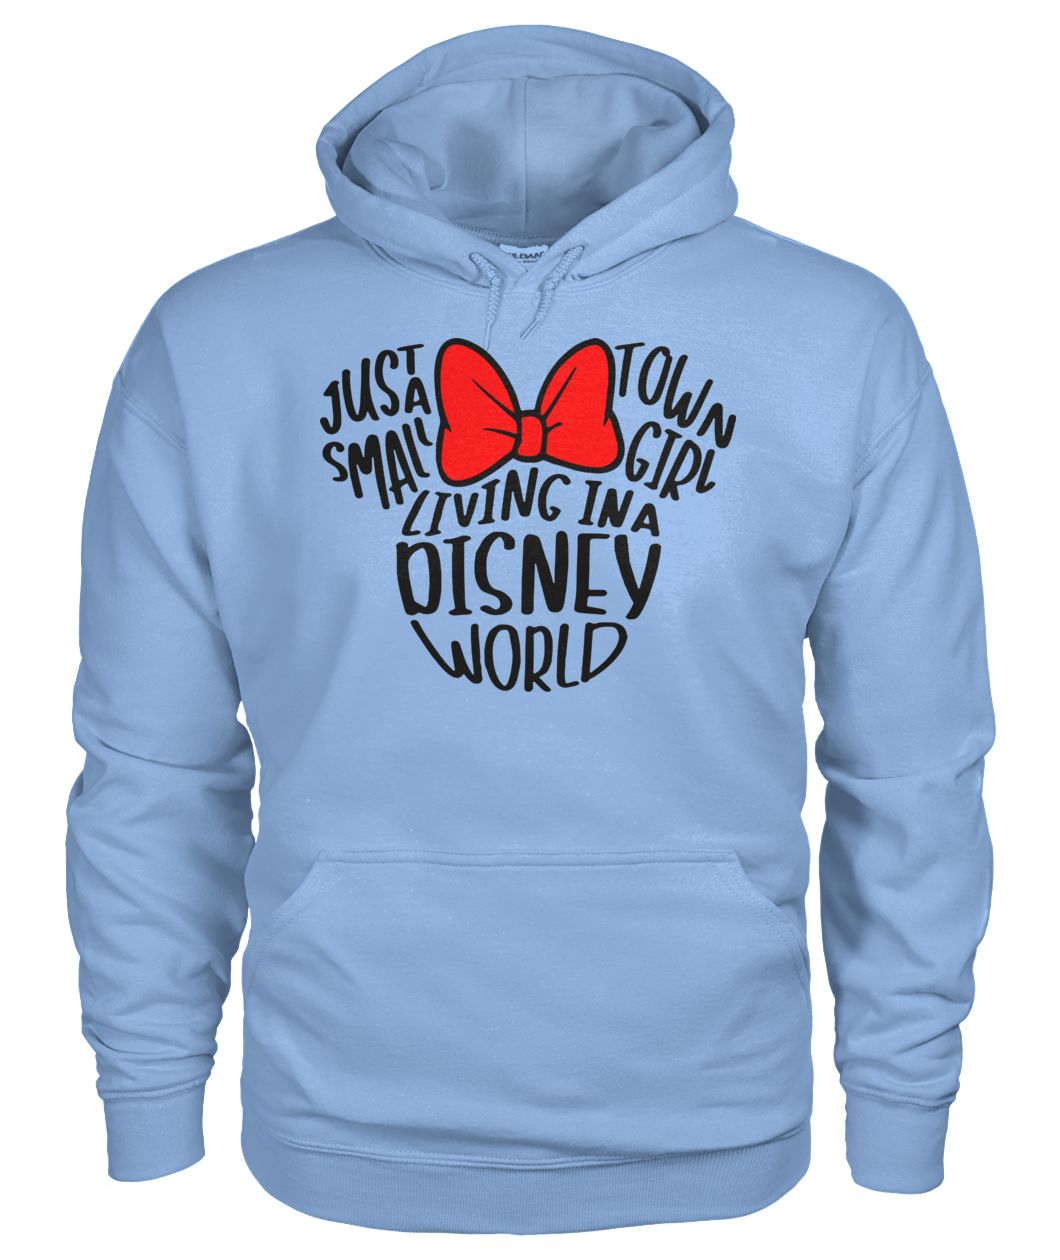 Mickey mouse just a small town girl living in a disney world gildan hoodie